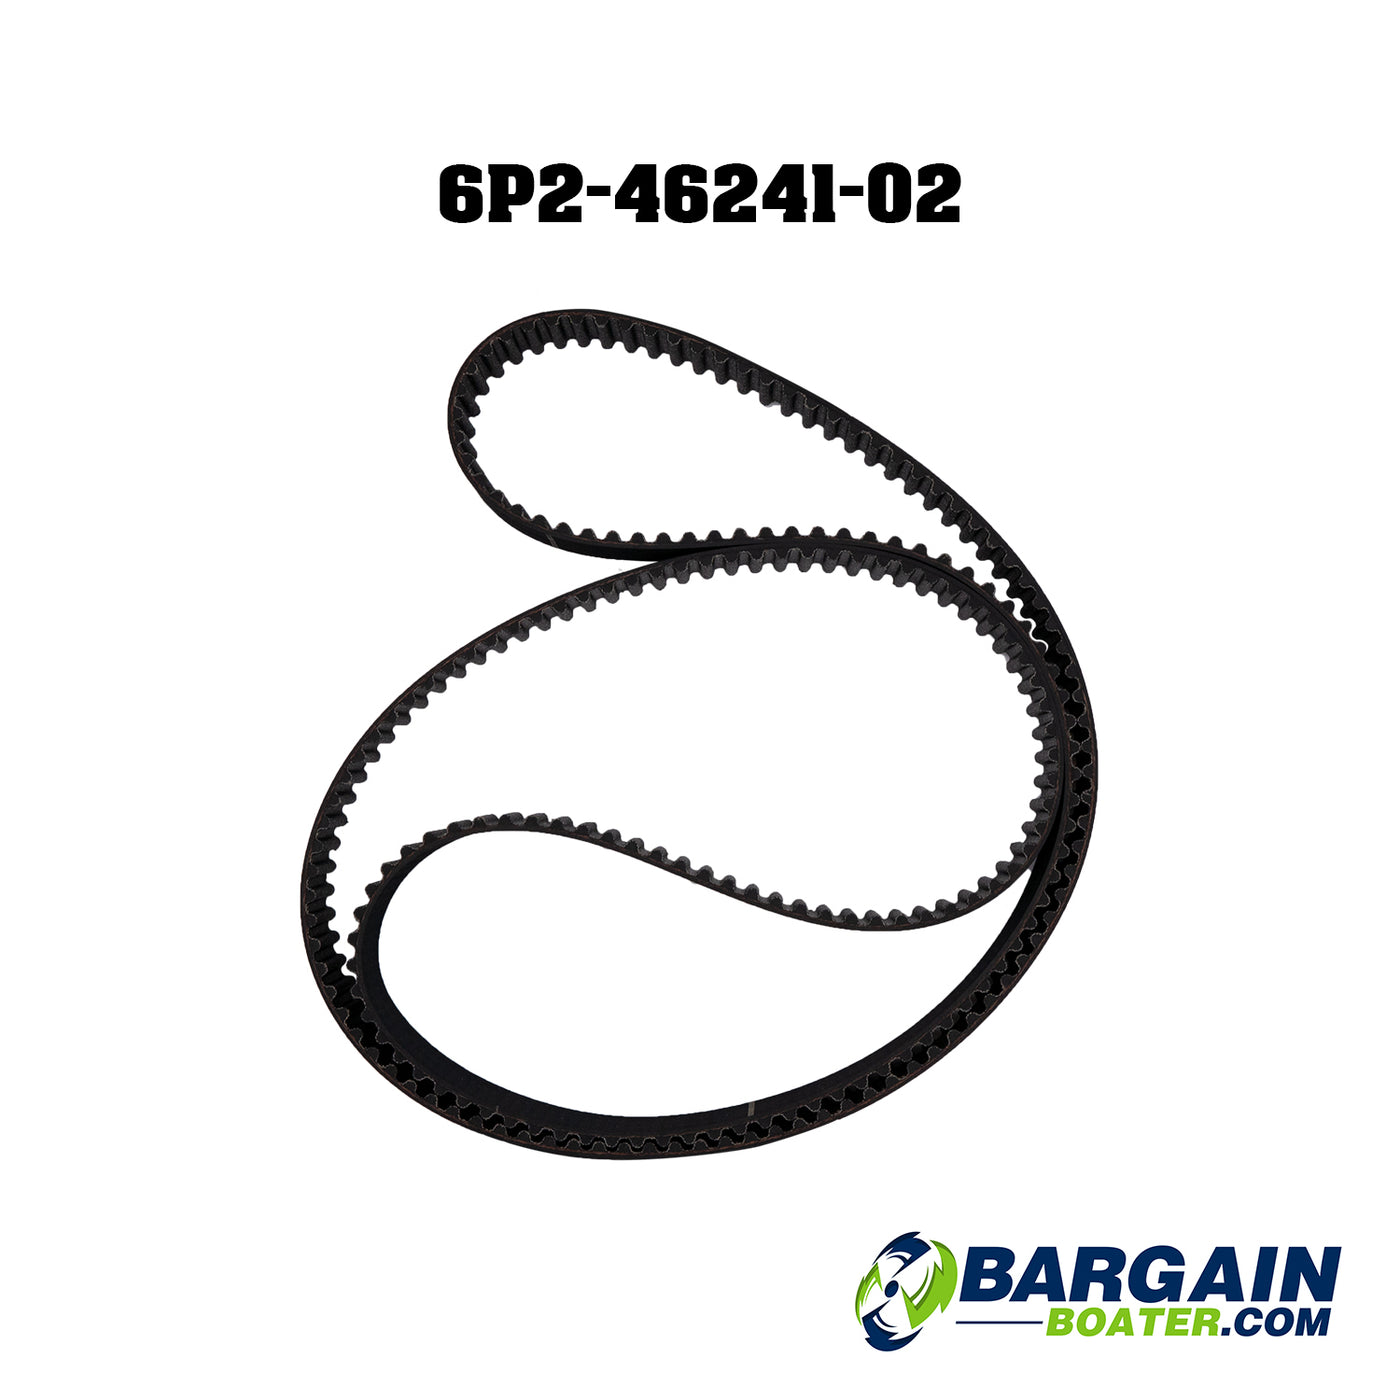 This is a Yamaha Engine Timing Belt. Part Number 6P2-46241-00-00 supersedes to new part number 6P2-46241-02-00.